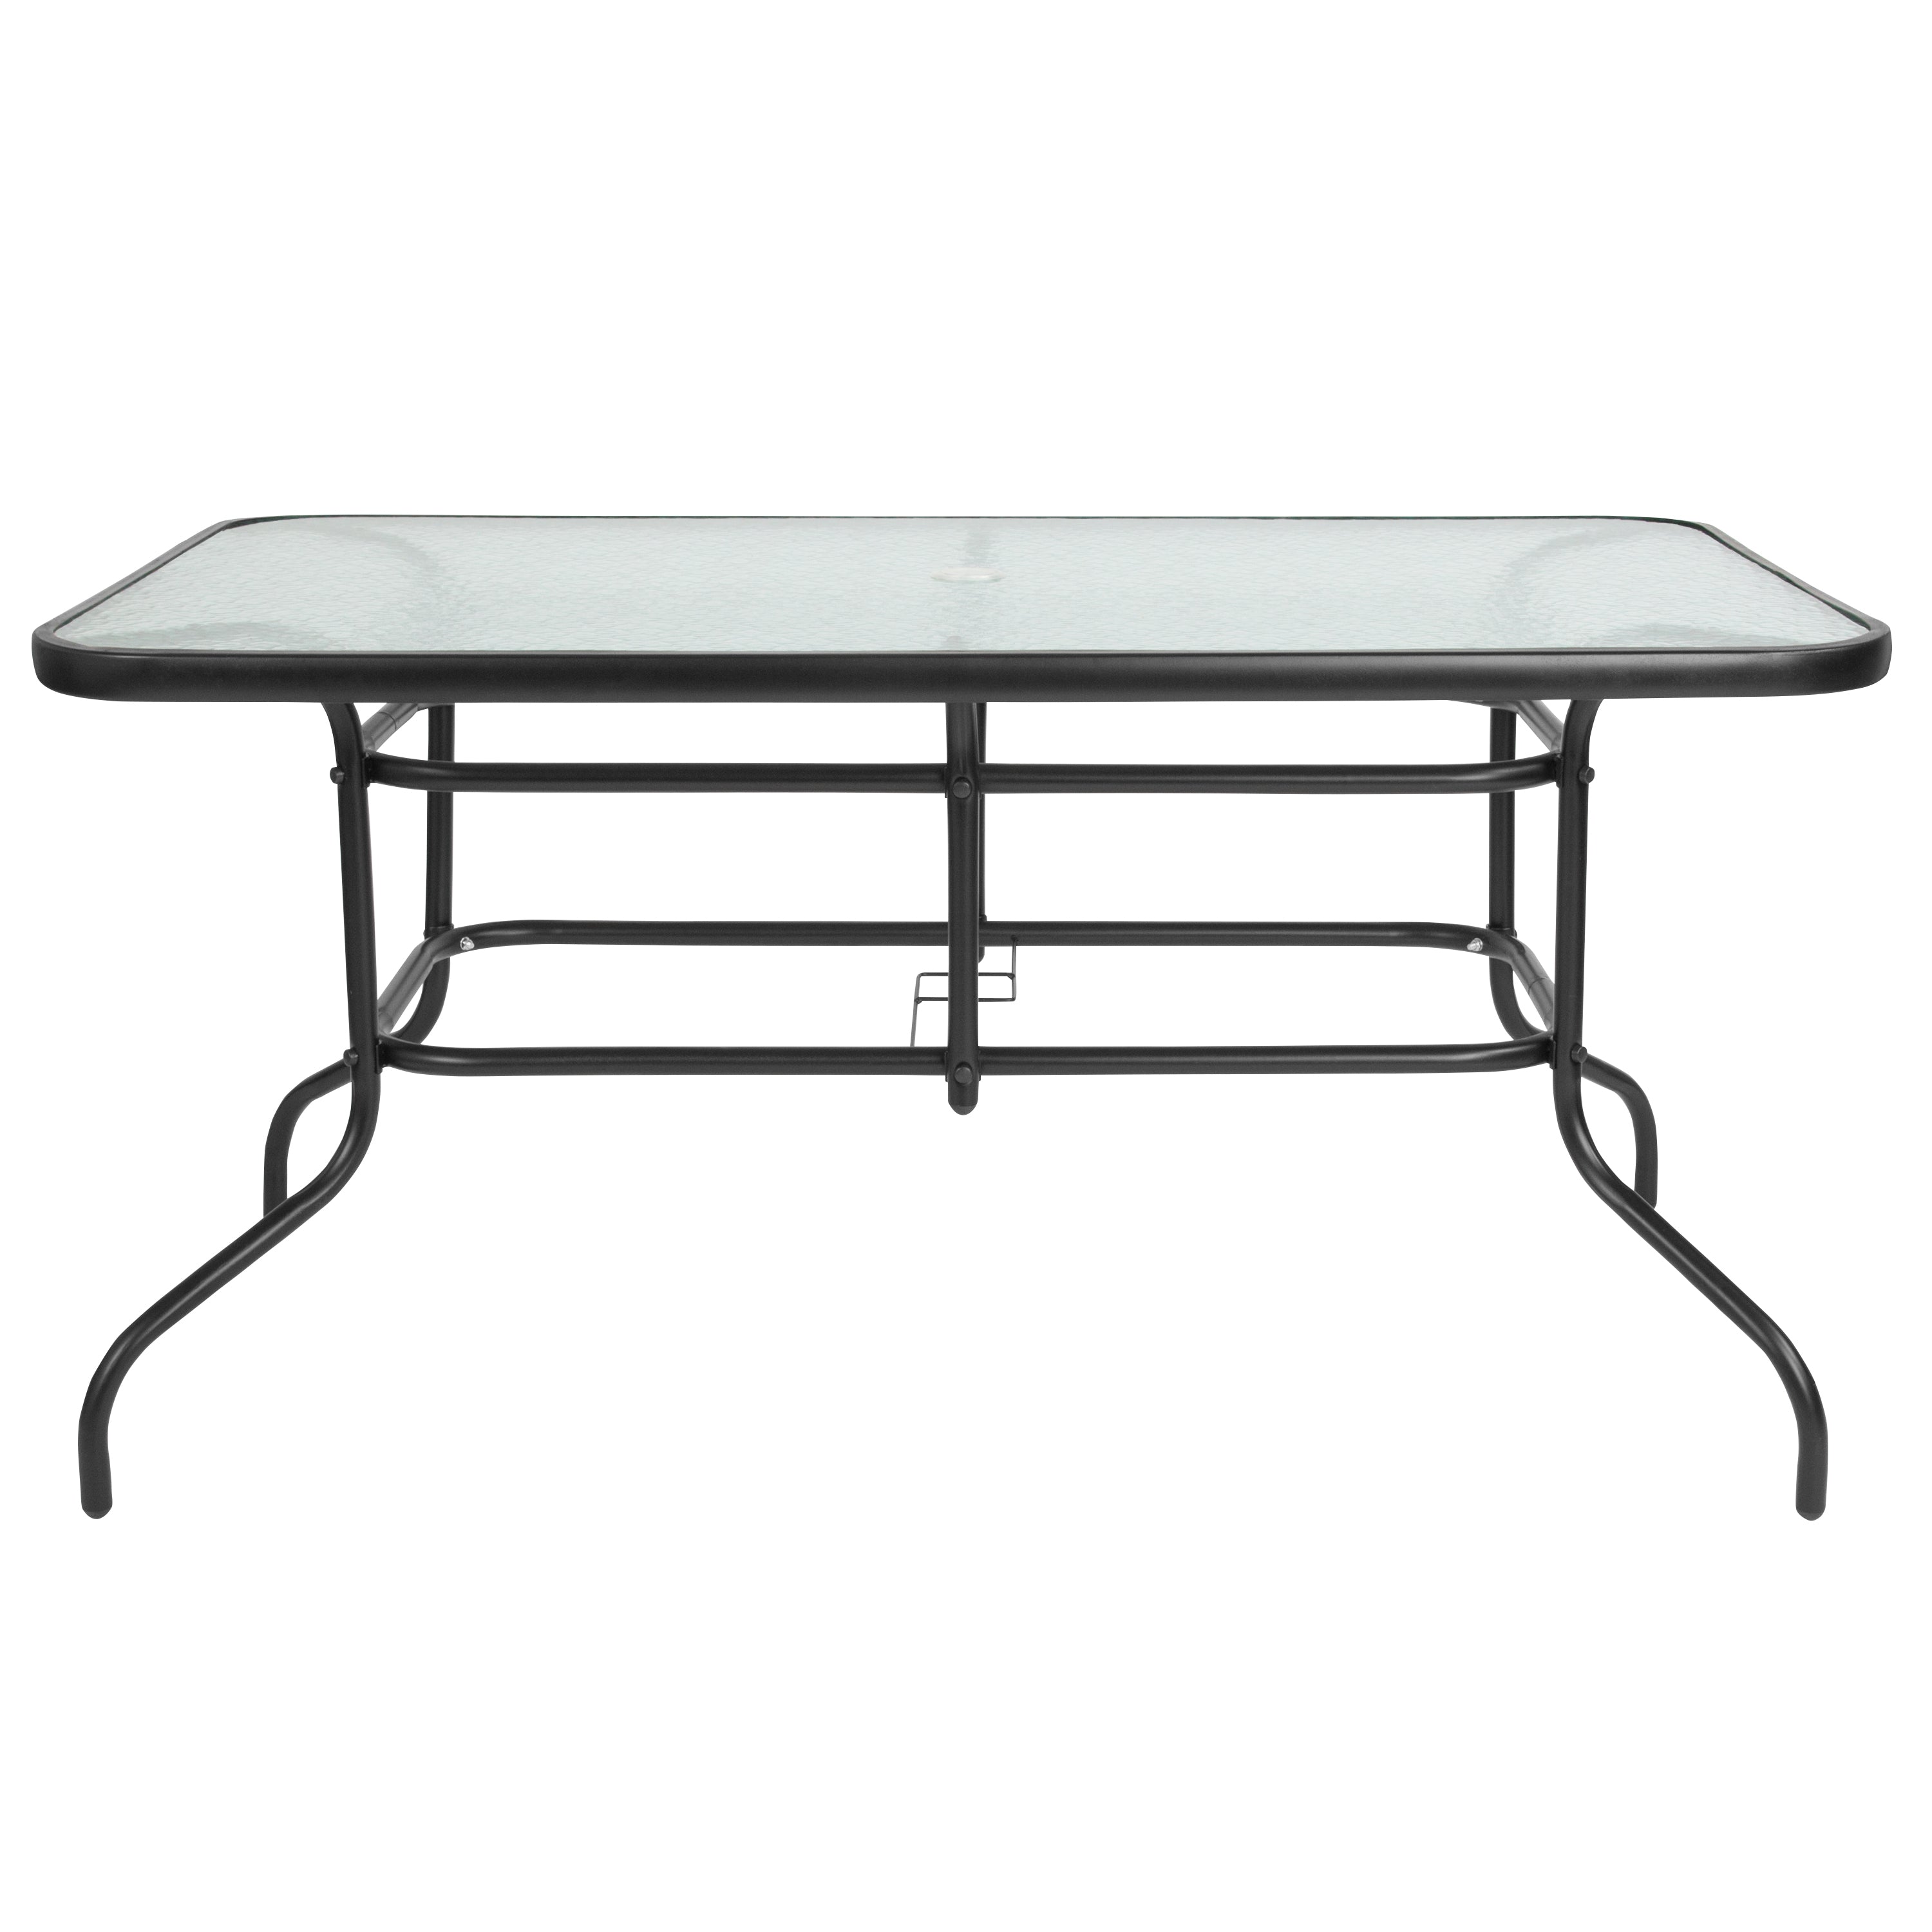 Tory 31.5" x 55" Rectangular Tempered Glass Metal Table with Umbrella Hole-Indoor/Outdoor Tables-Flash Furniture-Wall2Wall Furnishings